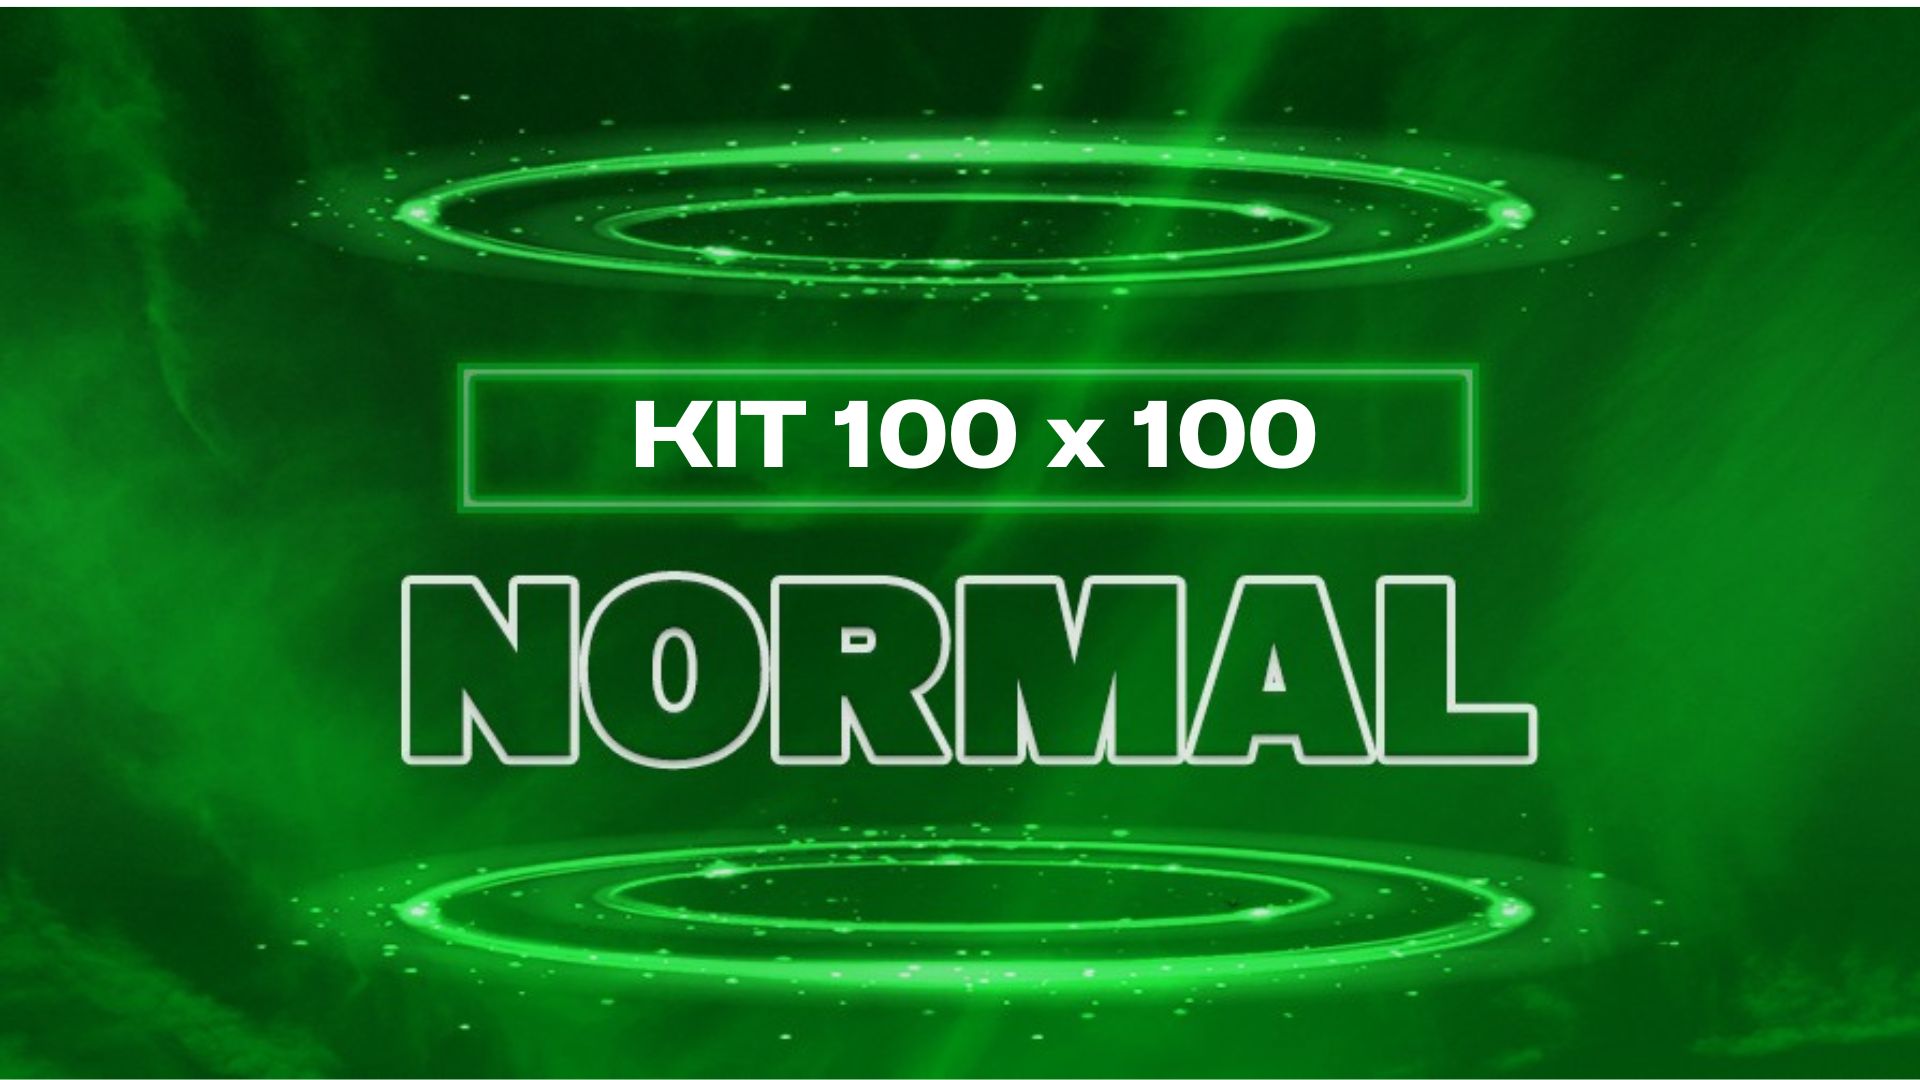 Kit-100-X-100-Norm